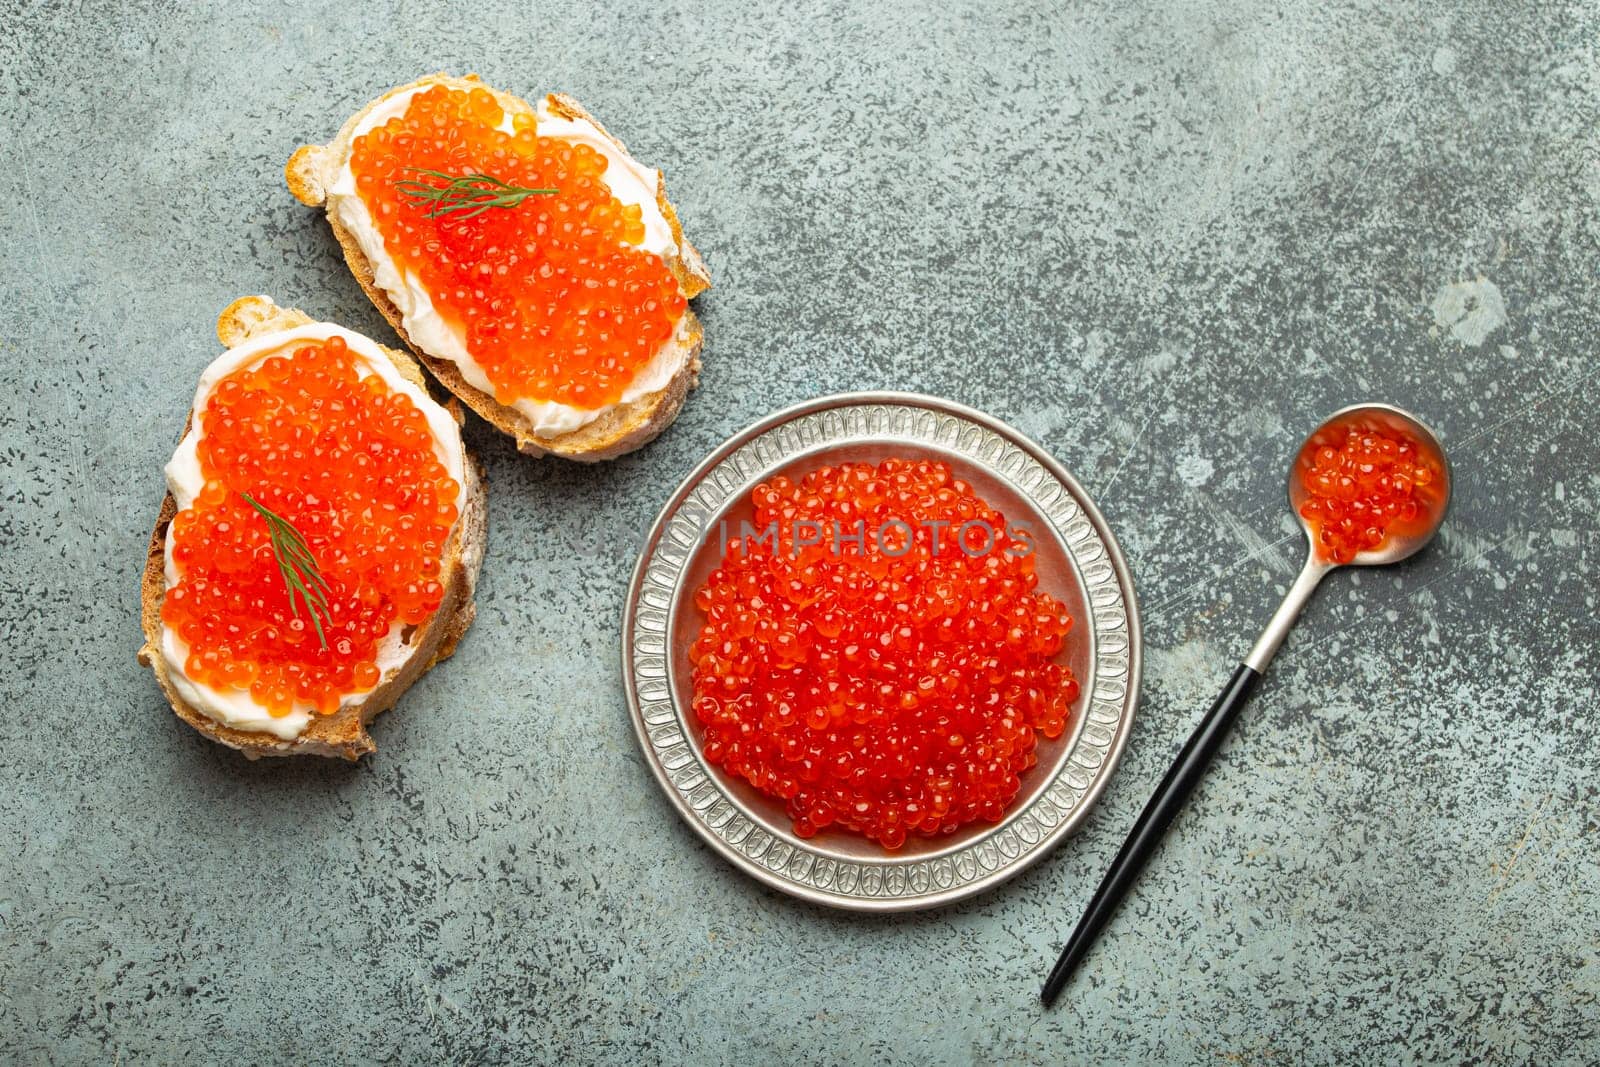 Small metal plate with red salmon caviar and two caviar toasts canape top view on grey concrete background, festive luxury delicacy and appetizer.